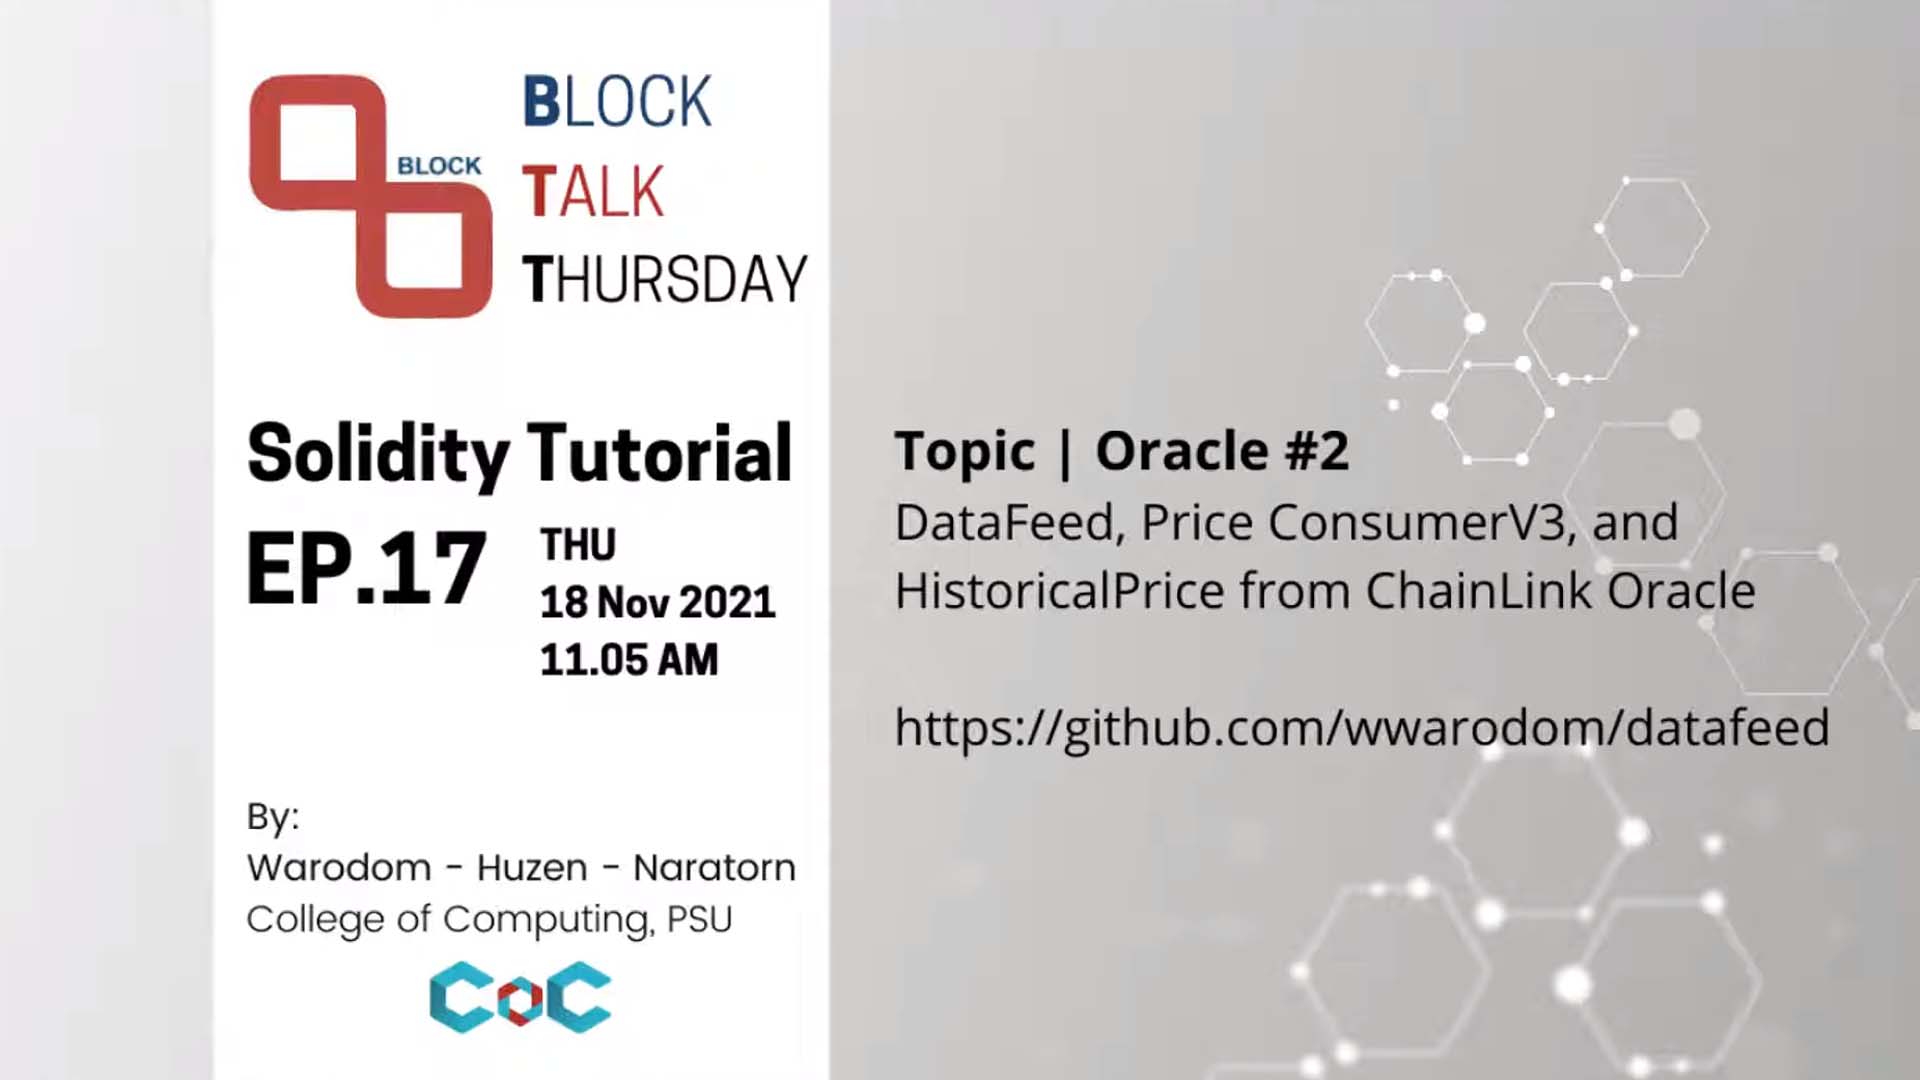 Solidity Tutorial Topic | Oracle #2